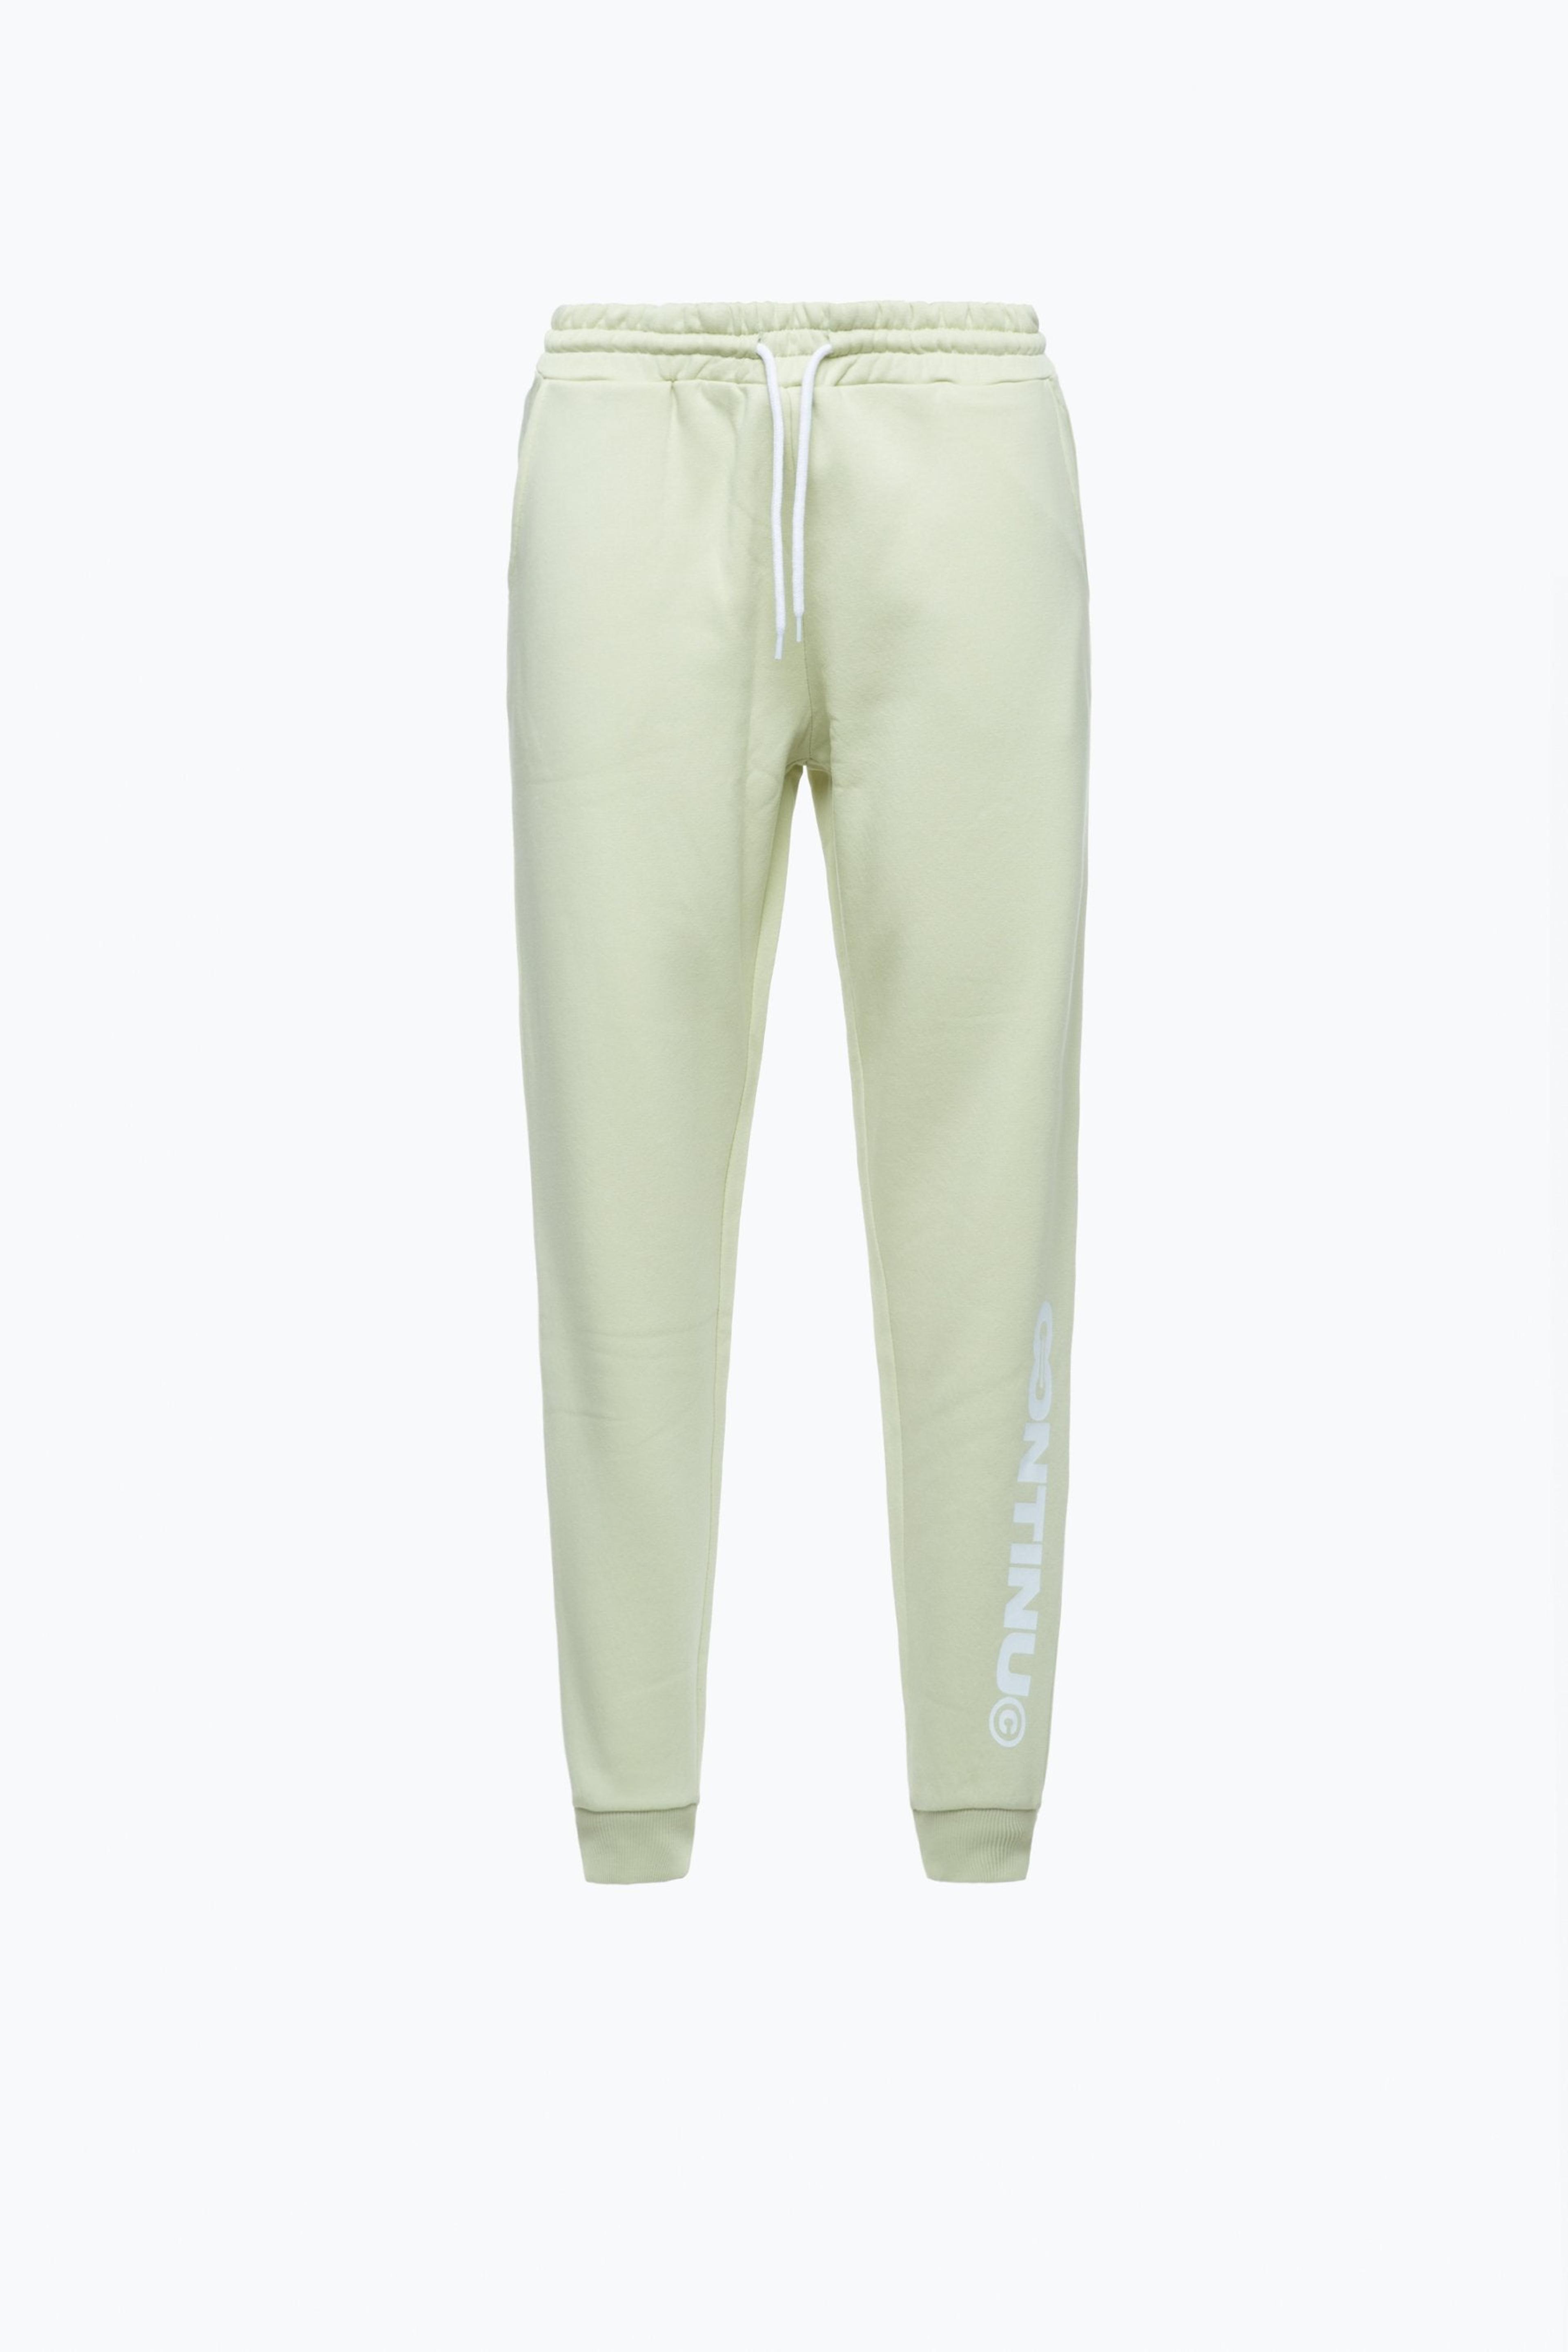 Alternate View 5 of CONTINU8 LIGHT GREEN JOGGERS